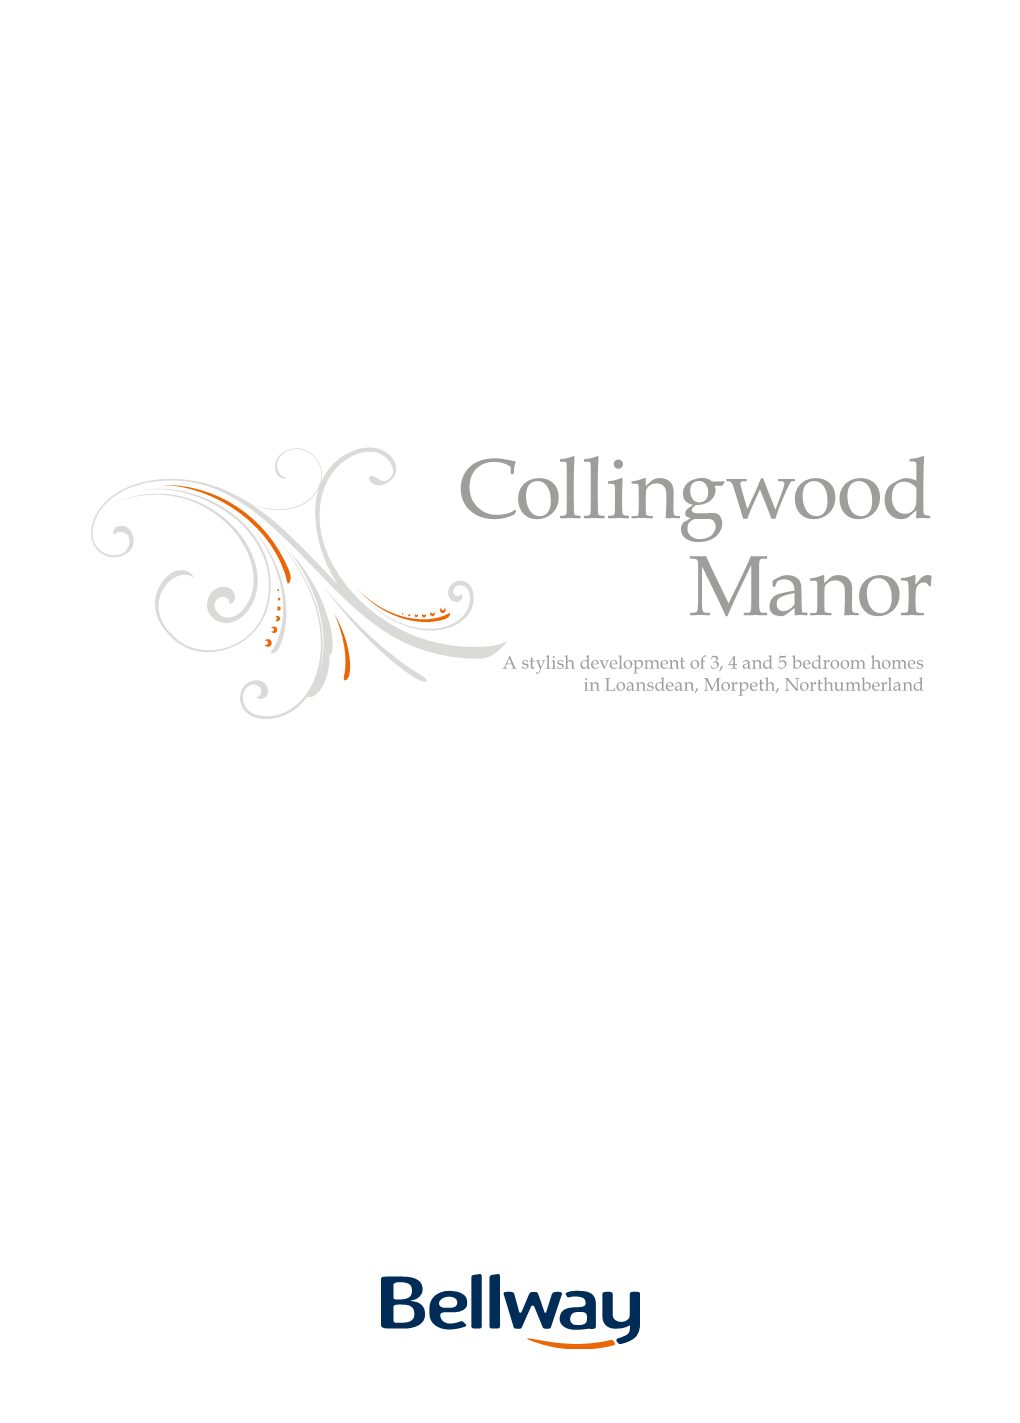 Collingwood Manor a Stylish Development of 3, 4 and 5 Bedroom Homes in Loansdean, Morpeth, Northumberland a Reputation You Can Rely On